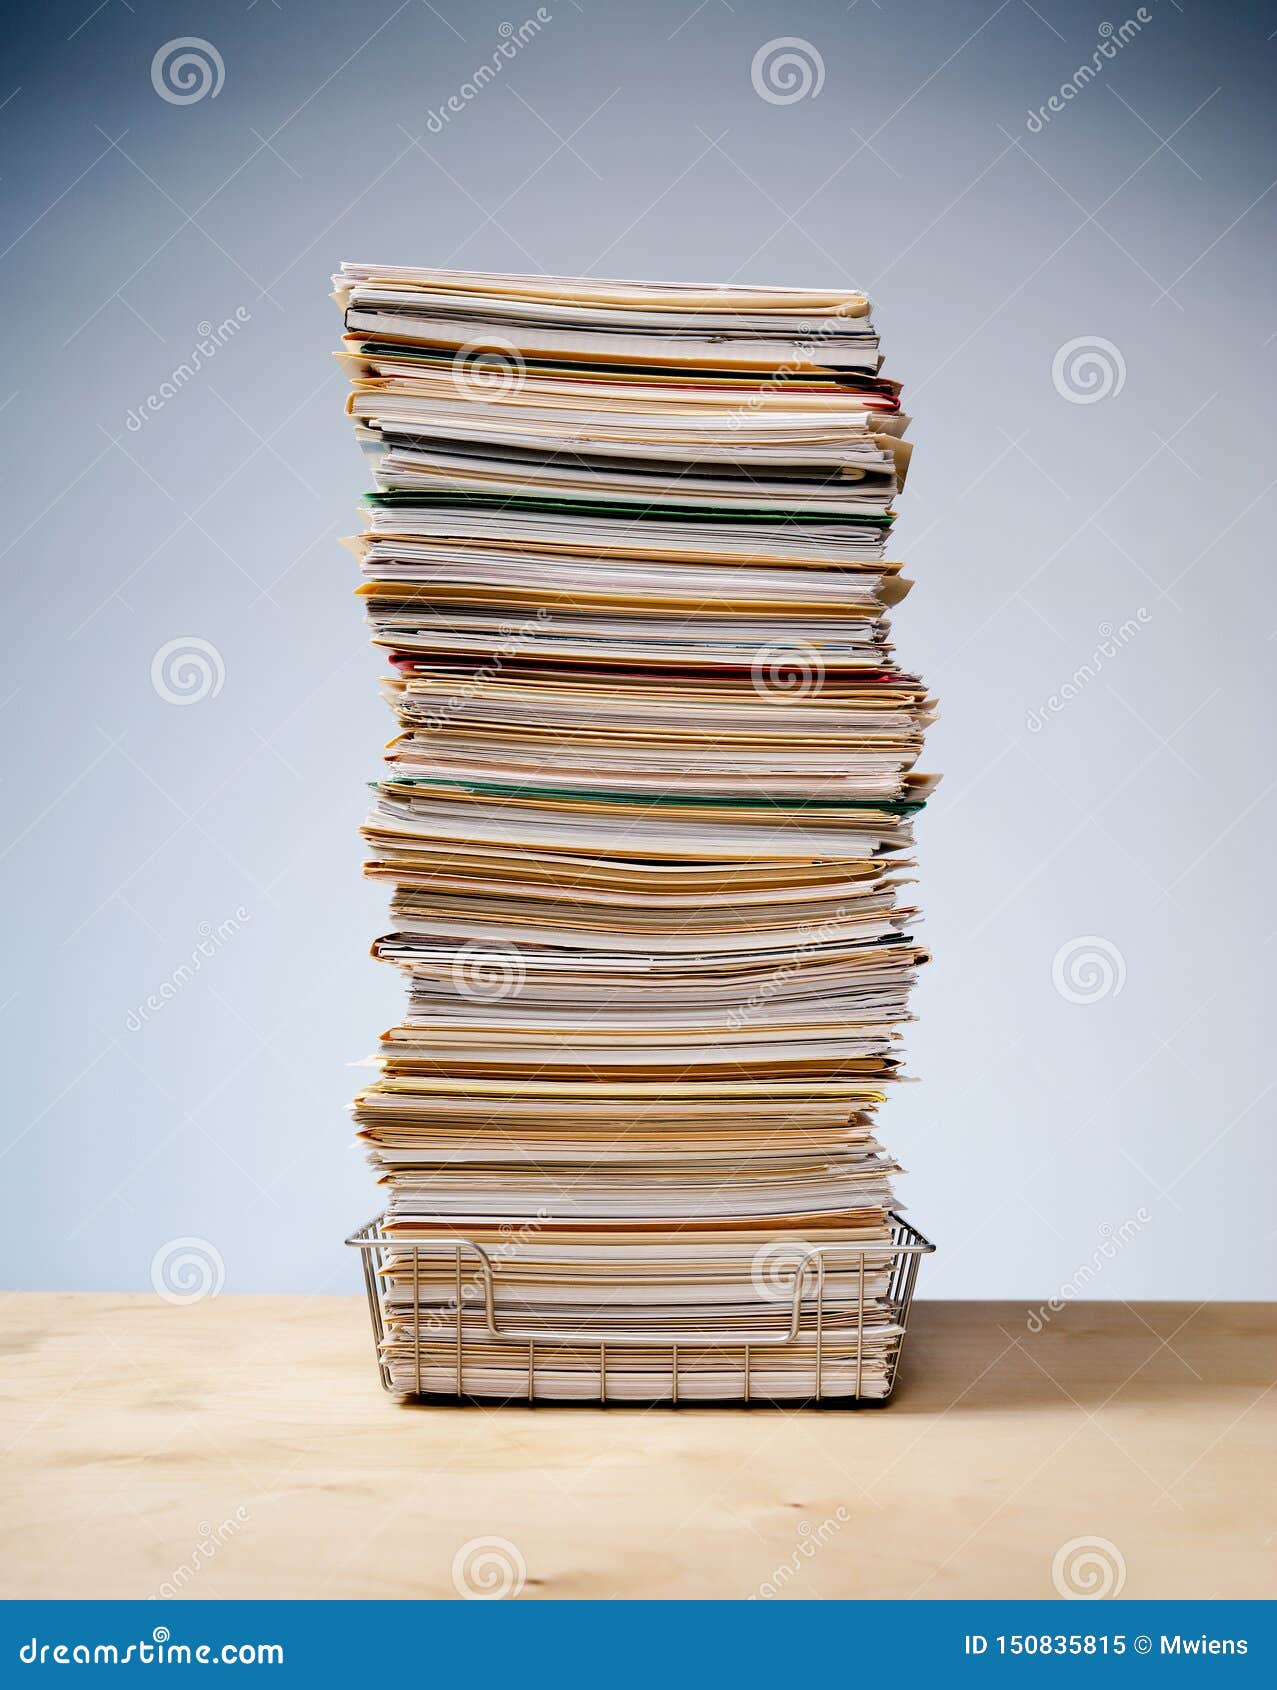 Desk Tray With Tall Stack Of Files And Paper Work Stock Image